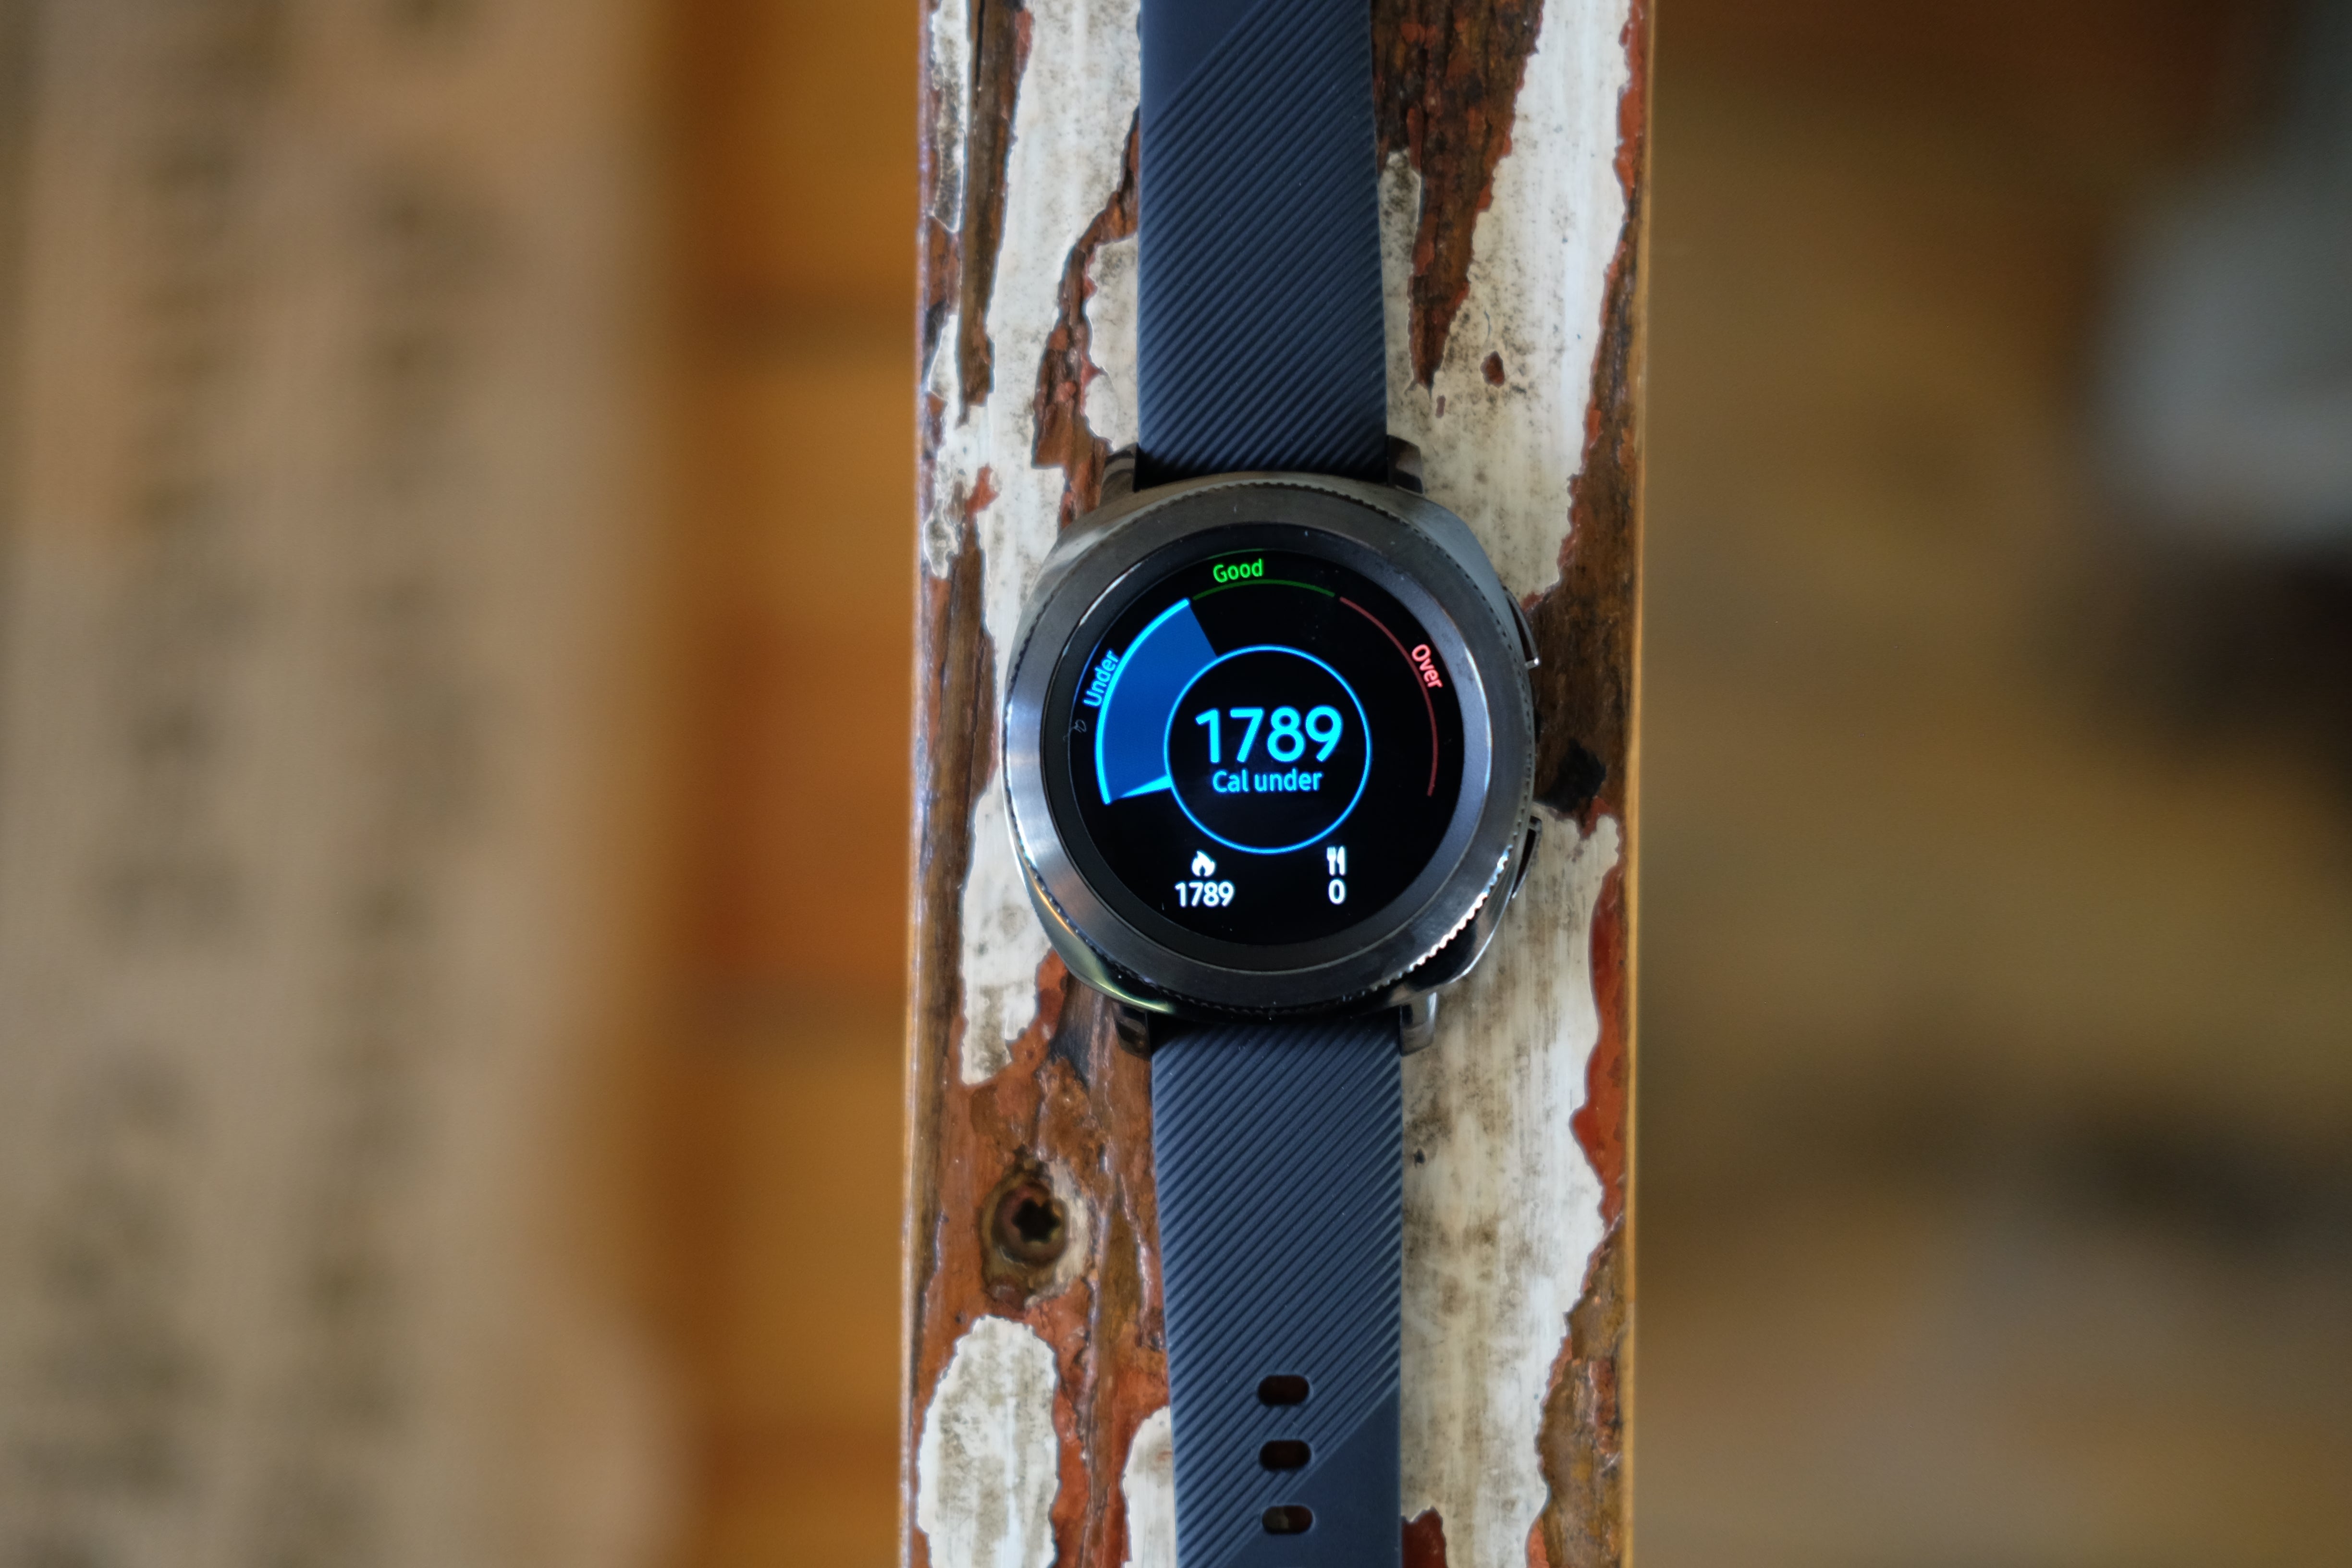 Samsung Gear Sport smartwatch displaying calorie count.